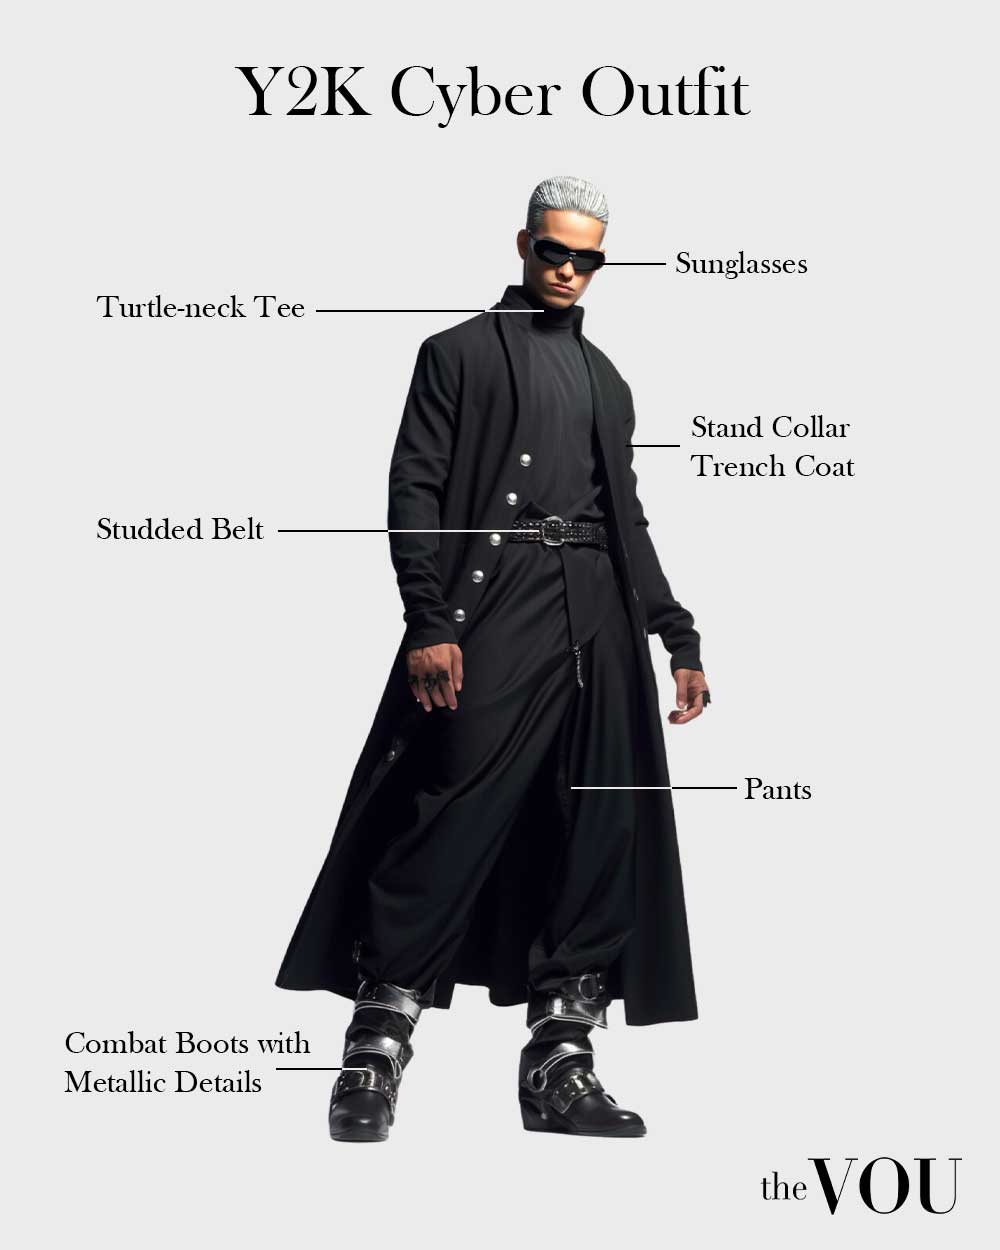 Y2K Cyber Style outfit for men